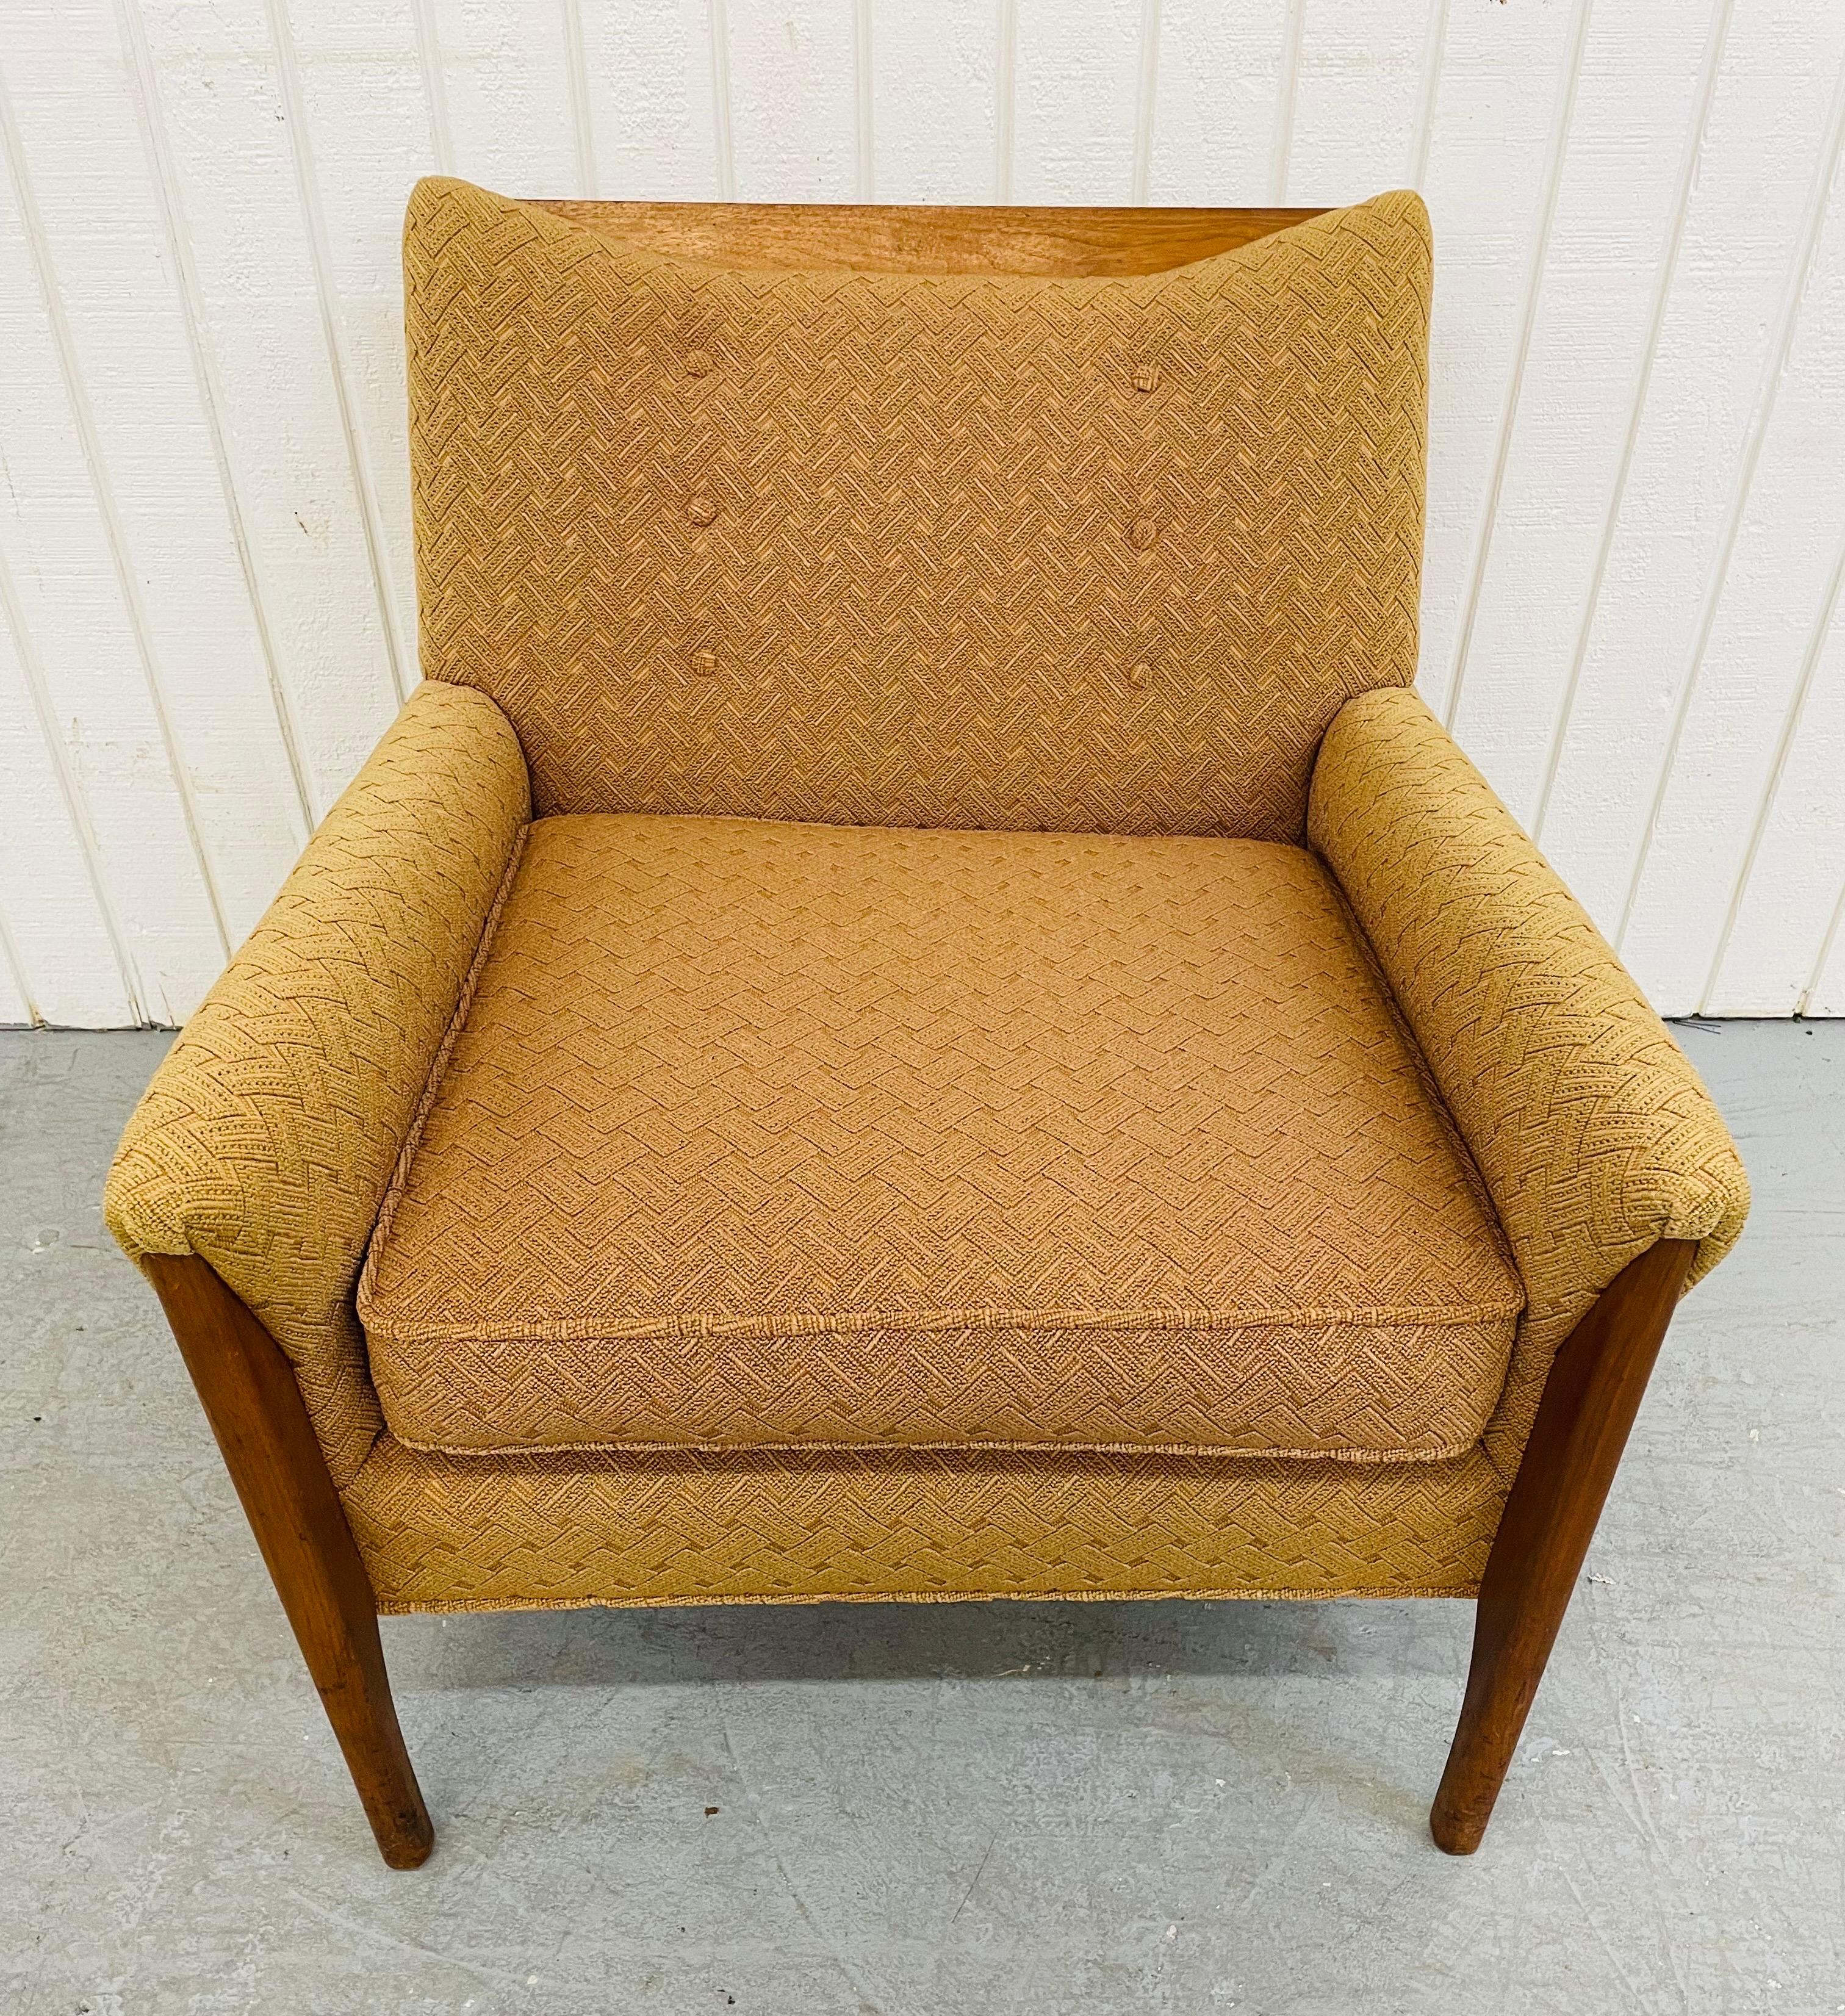 This listing is for a mid-century Kroehler style walnut arm chair. Featuring the original golden woven upholstery, walnut legs and accent on the backrest, and removable cushion.